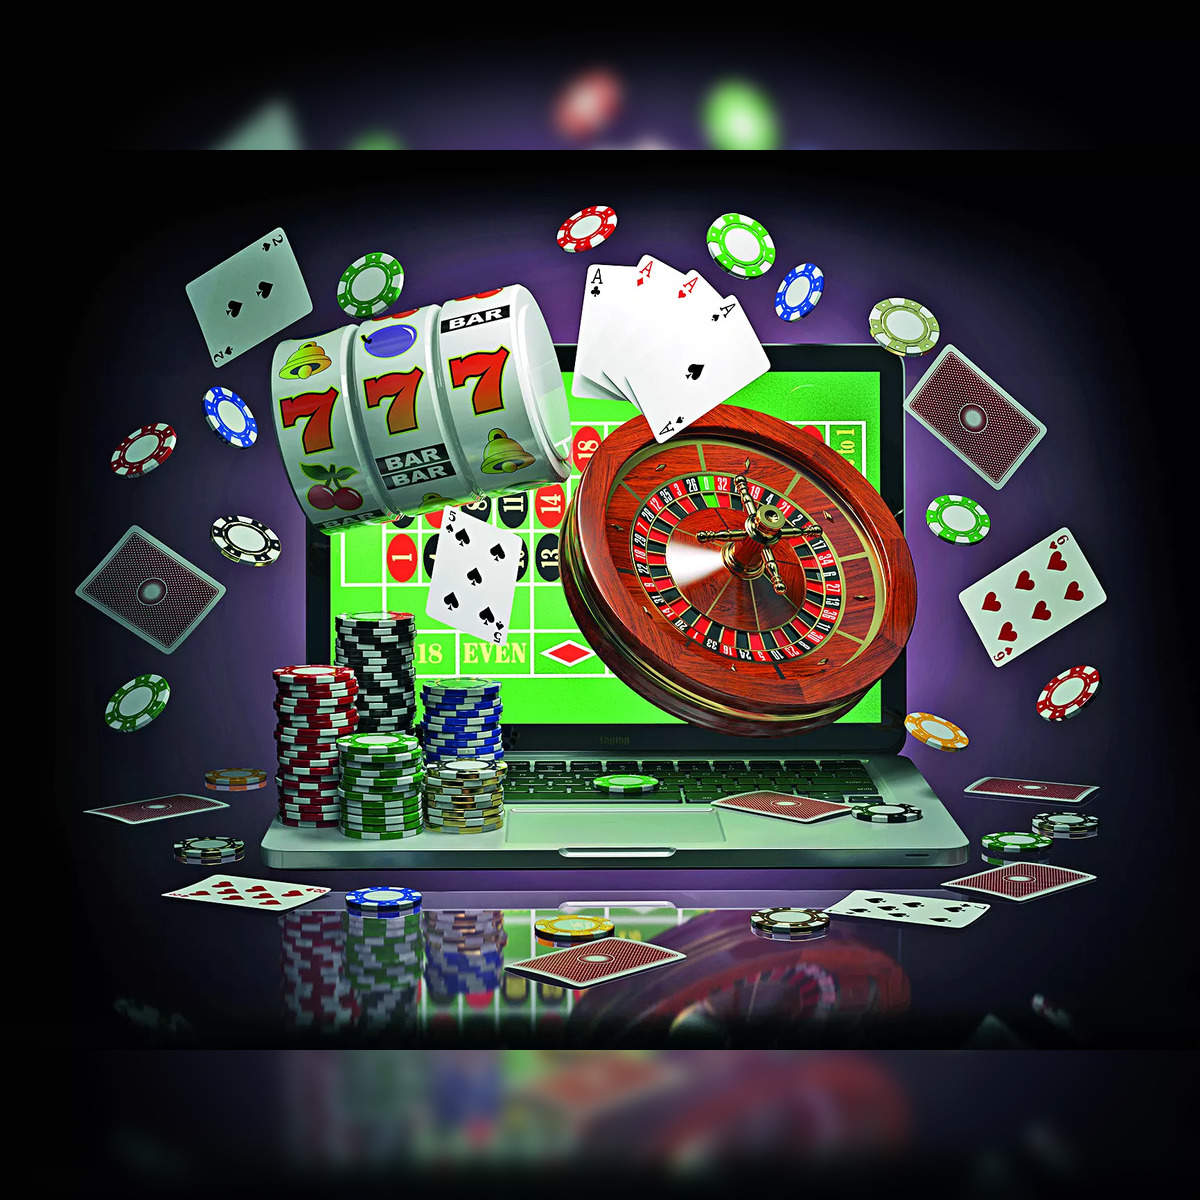 The Impact of best online casino on Cognitive Abilities